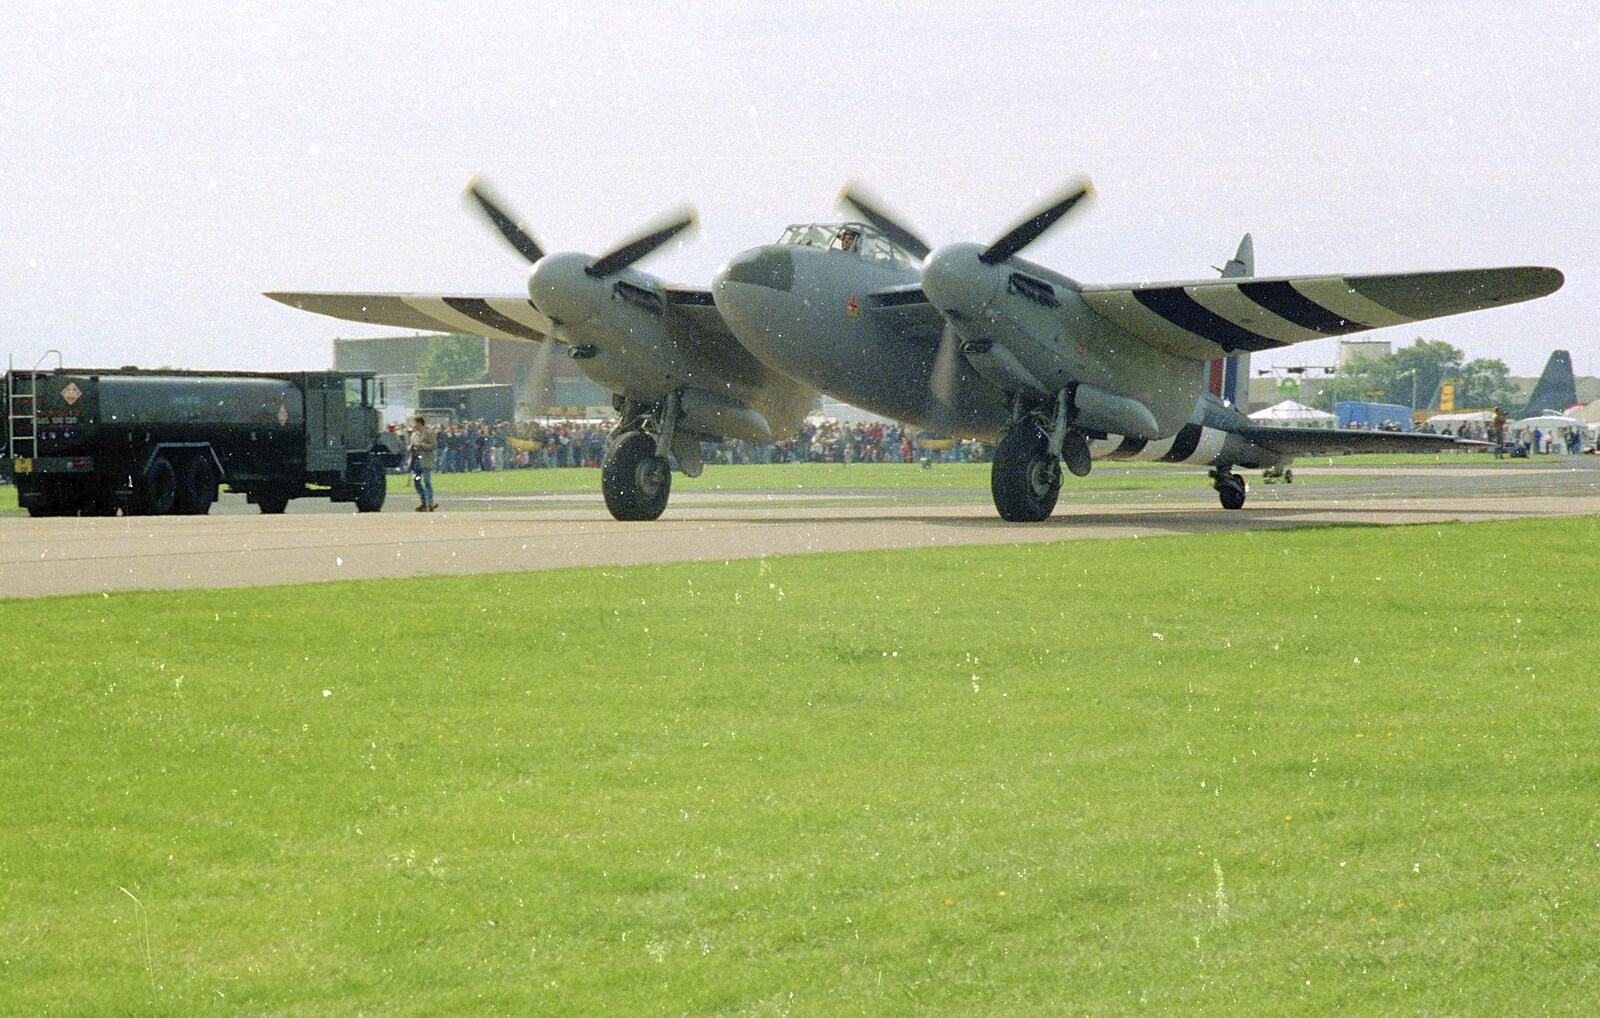 Overlooked legend the de Havilland Mosquito from The Mildenhall Air Fete, Mildenhall, Suffolk - 29th May 1994